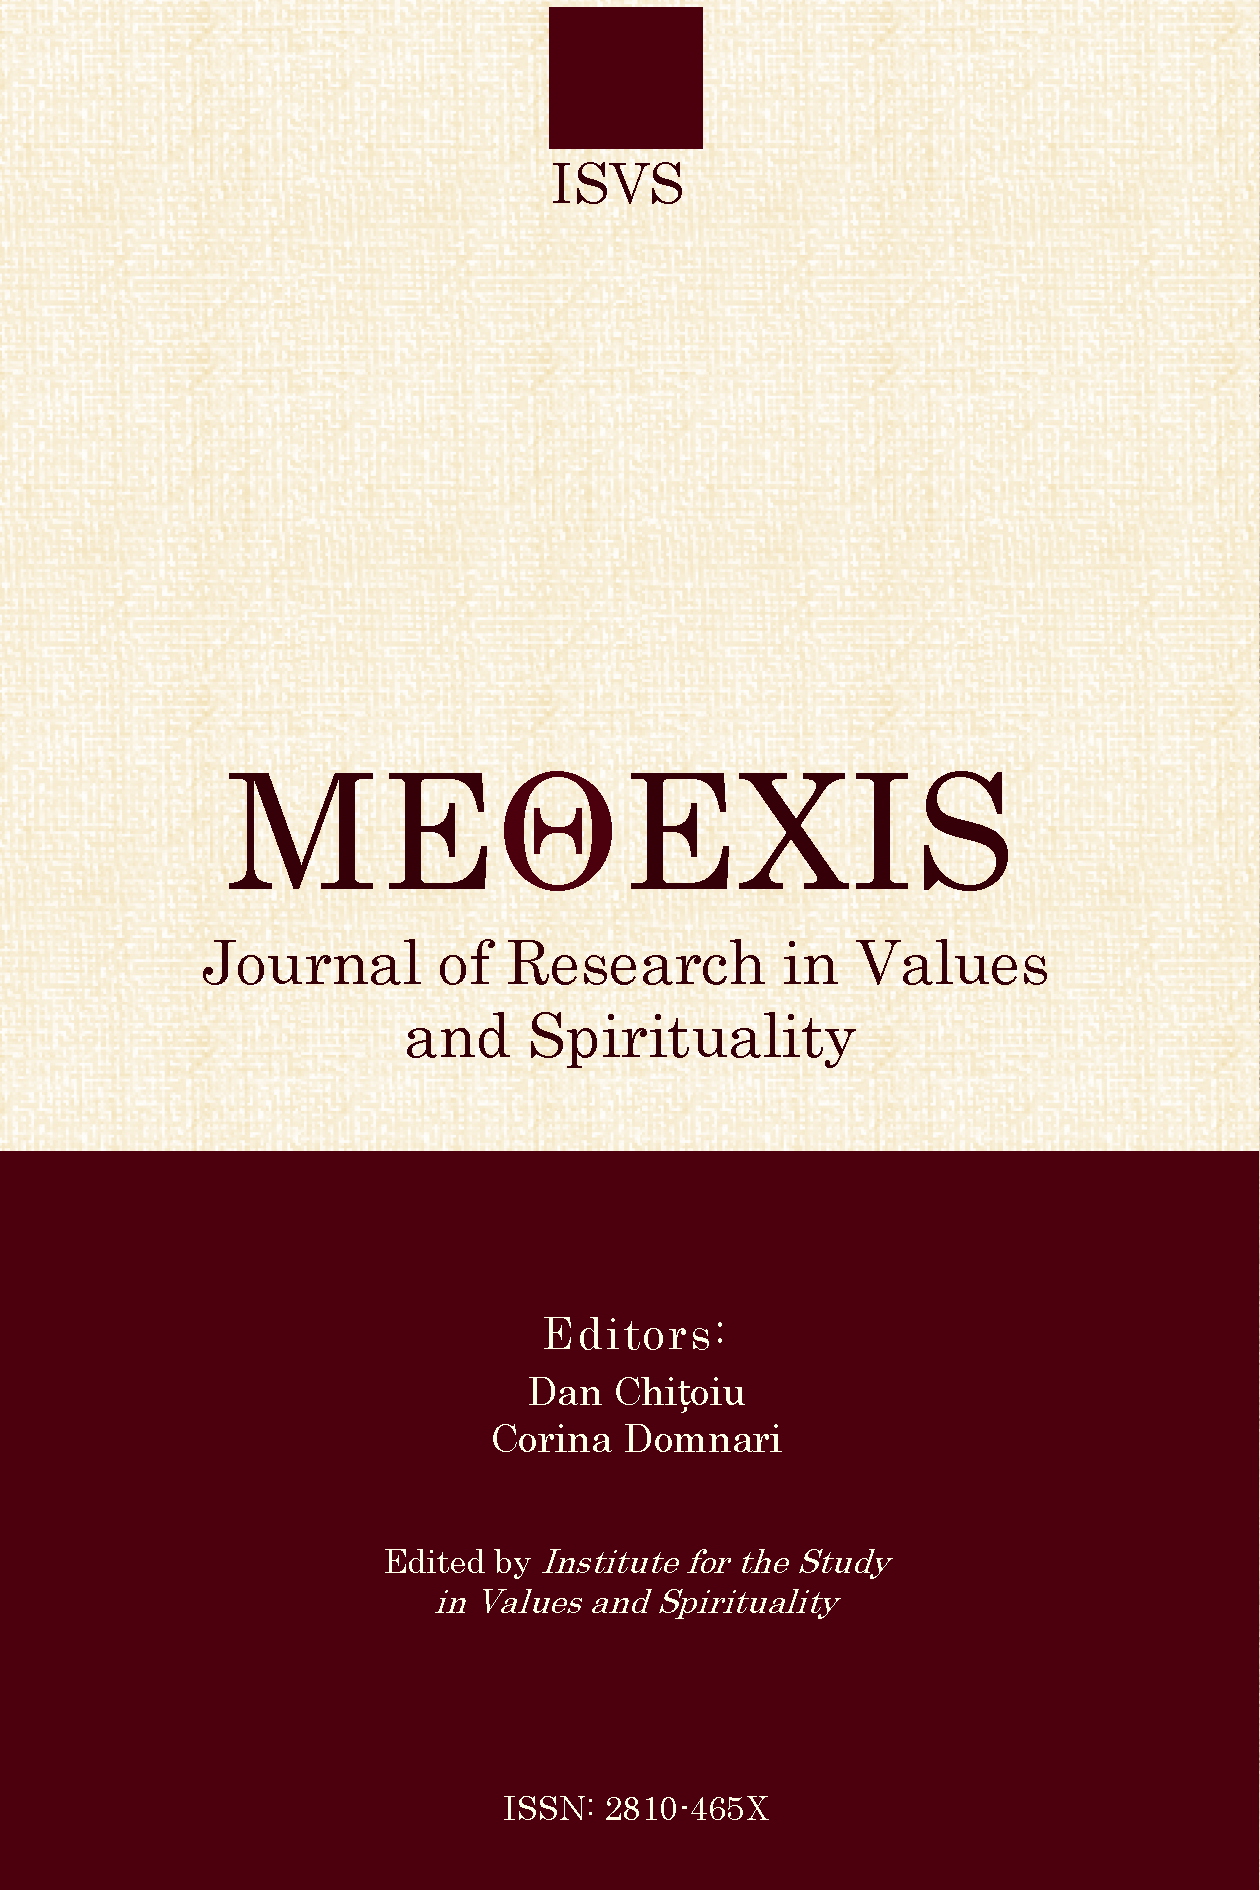 METHEXIS Journal of Research in Values and Spirituality Cover Image